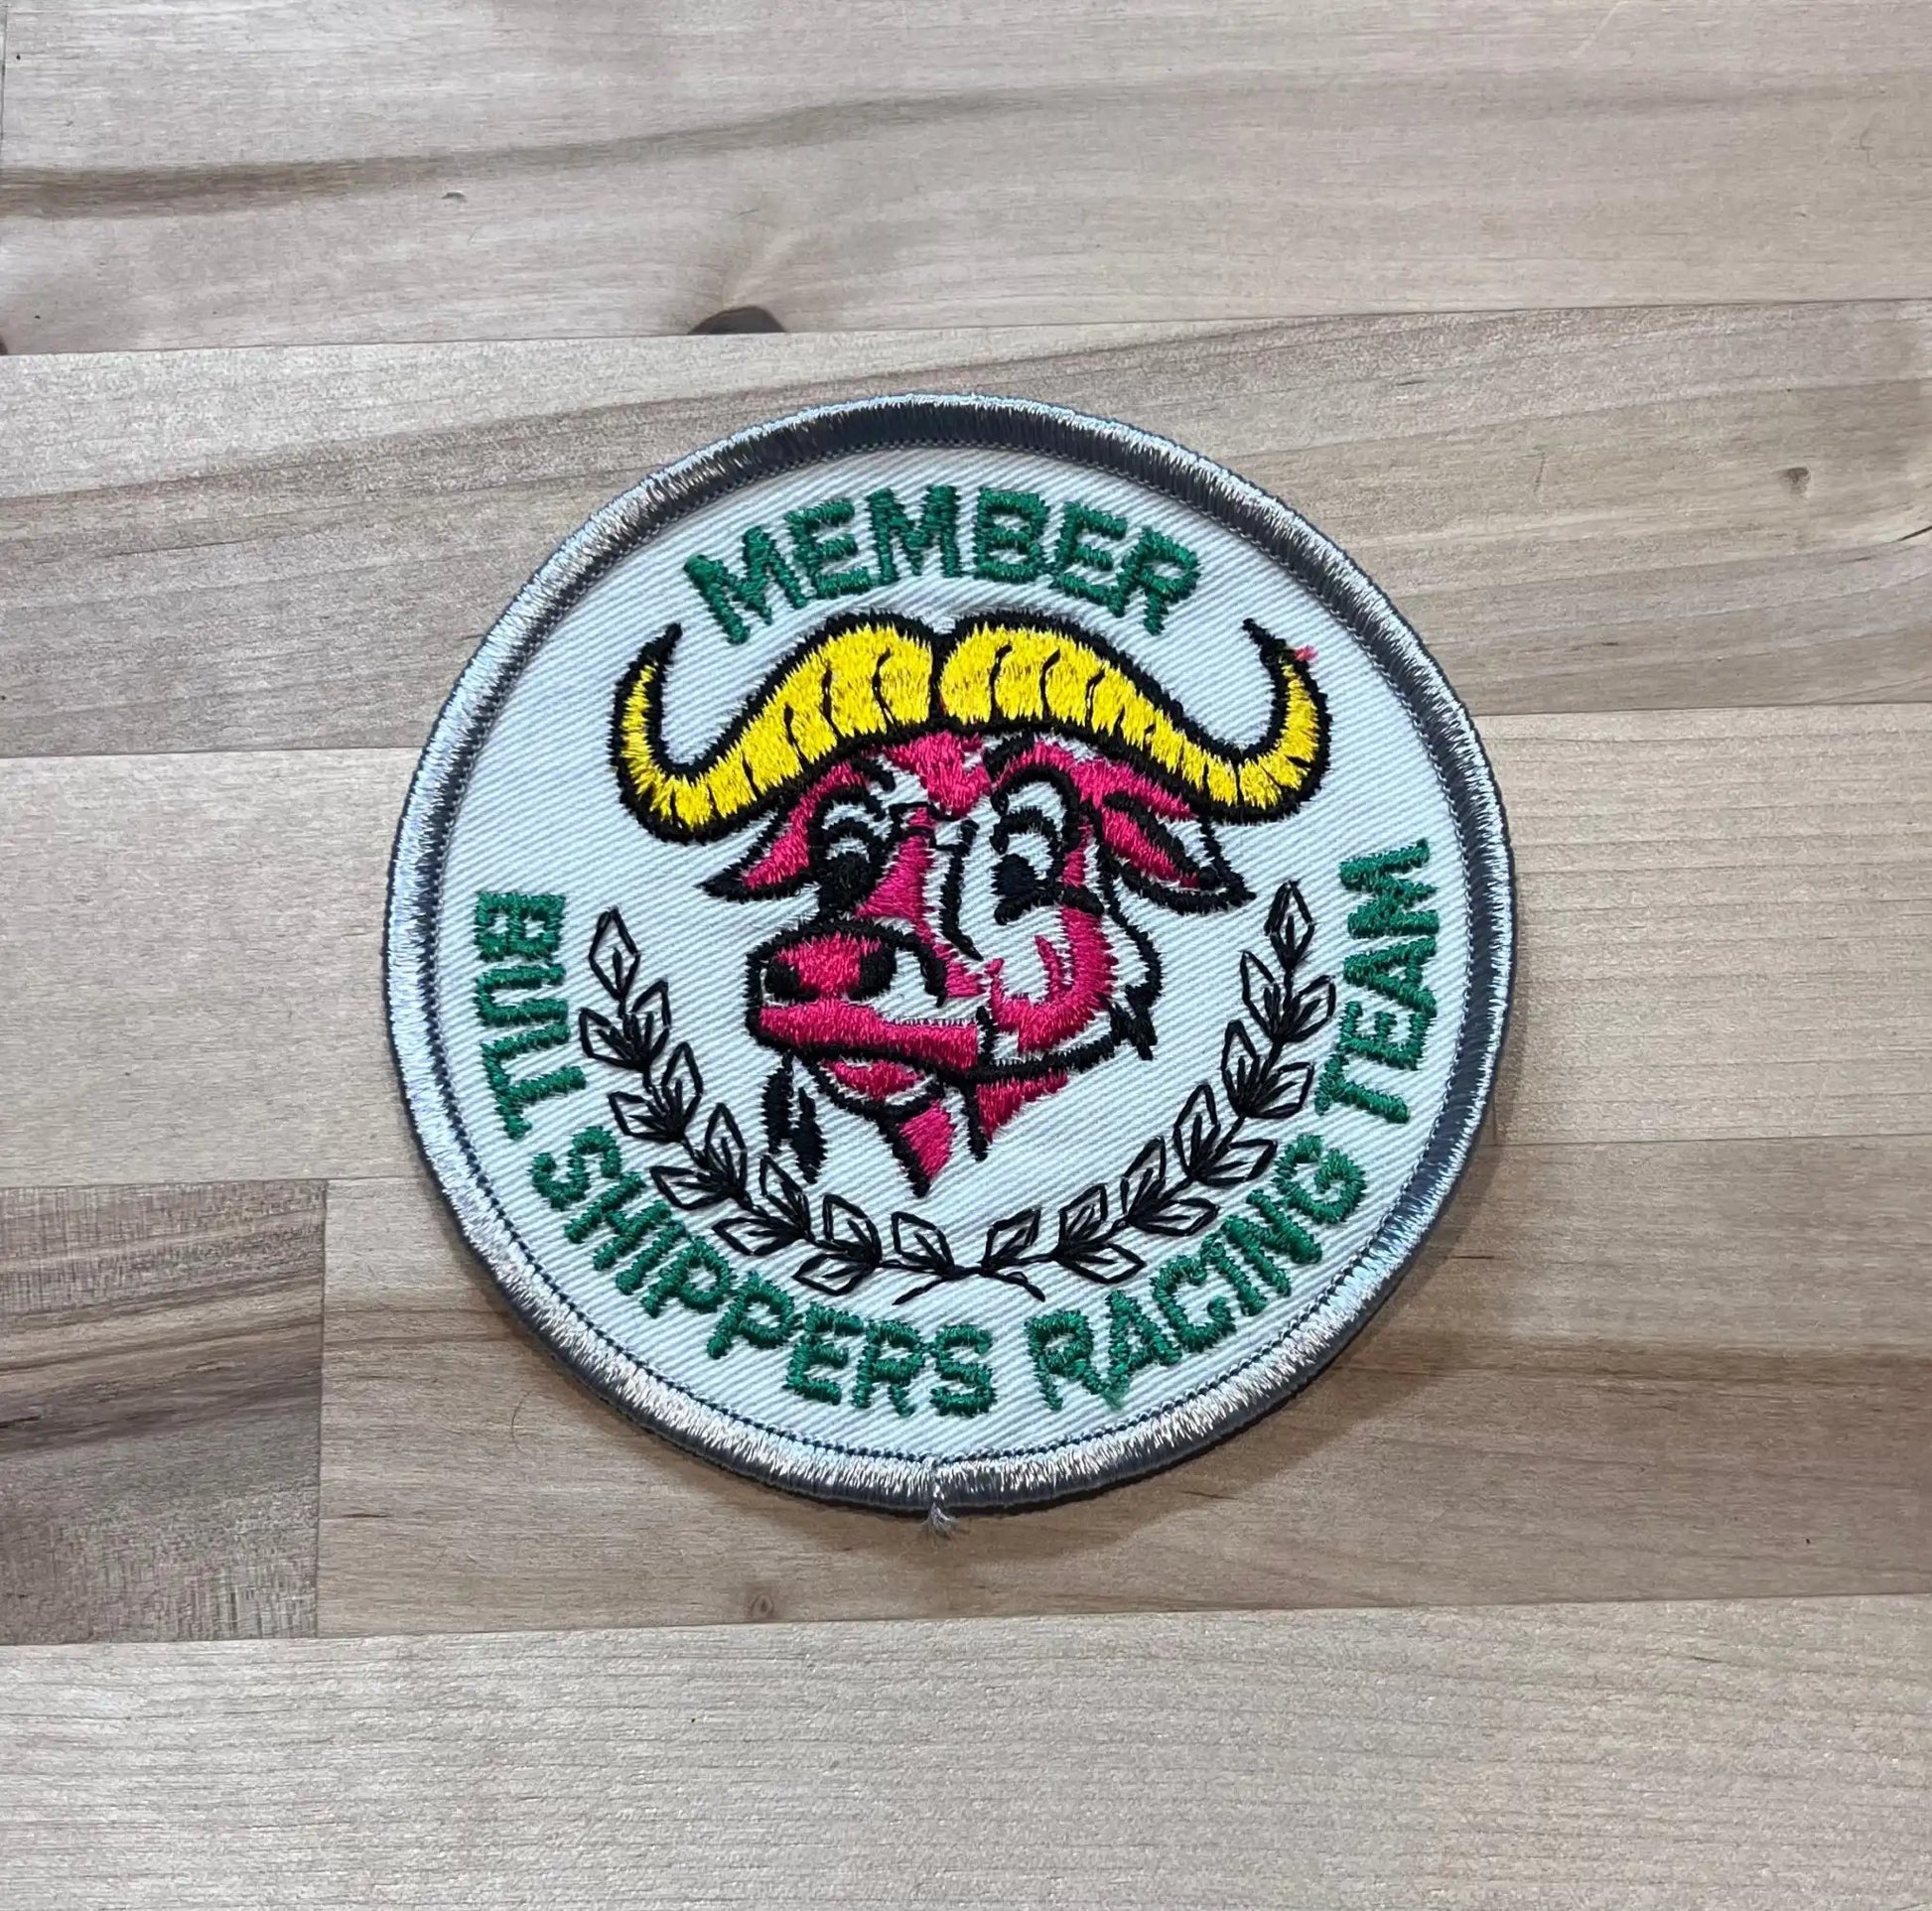 Members Bull Shippers Racing Team Vintage Patch New Old Stock Eclectic Relic has been safely stored away for decades and measures approximately 4 inch circle